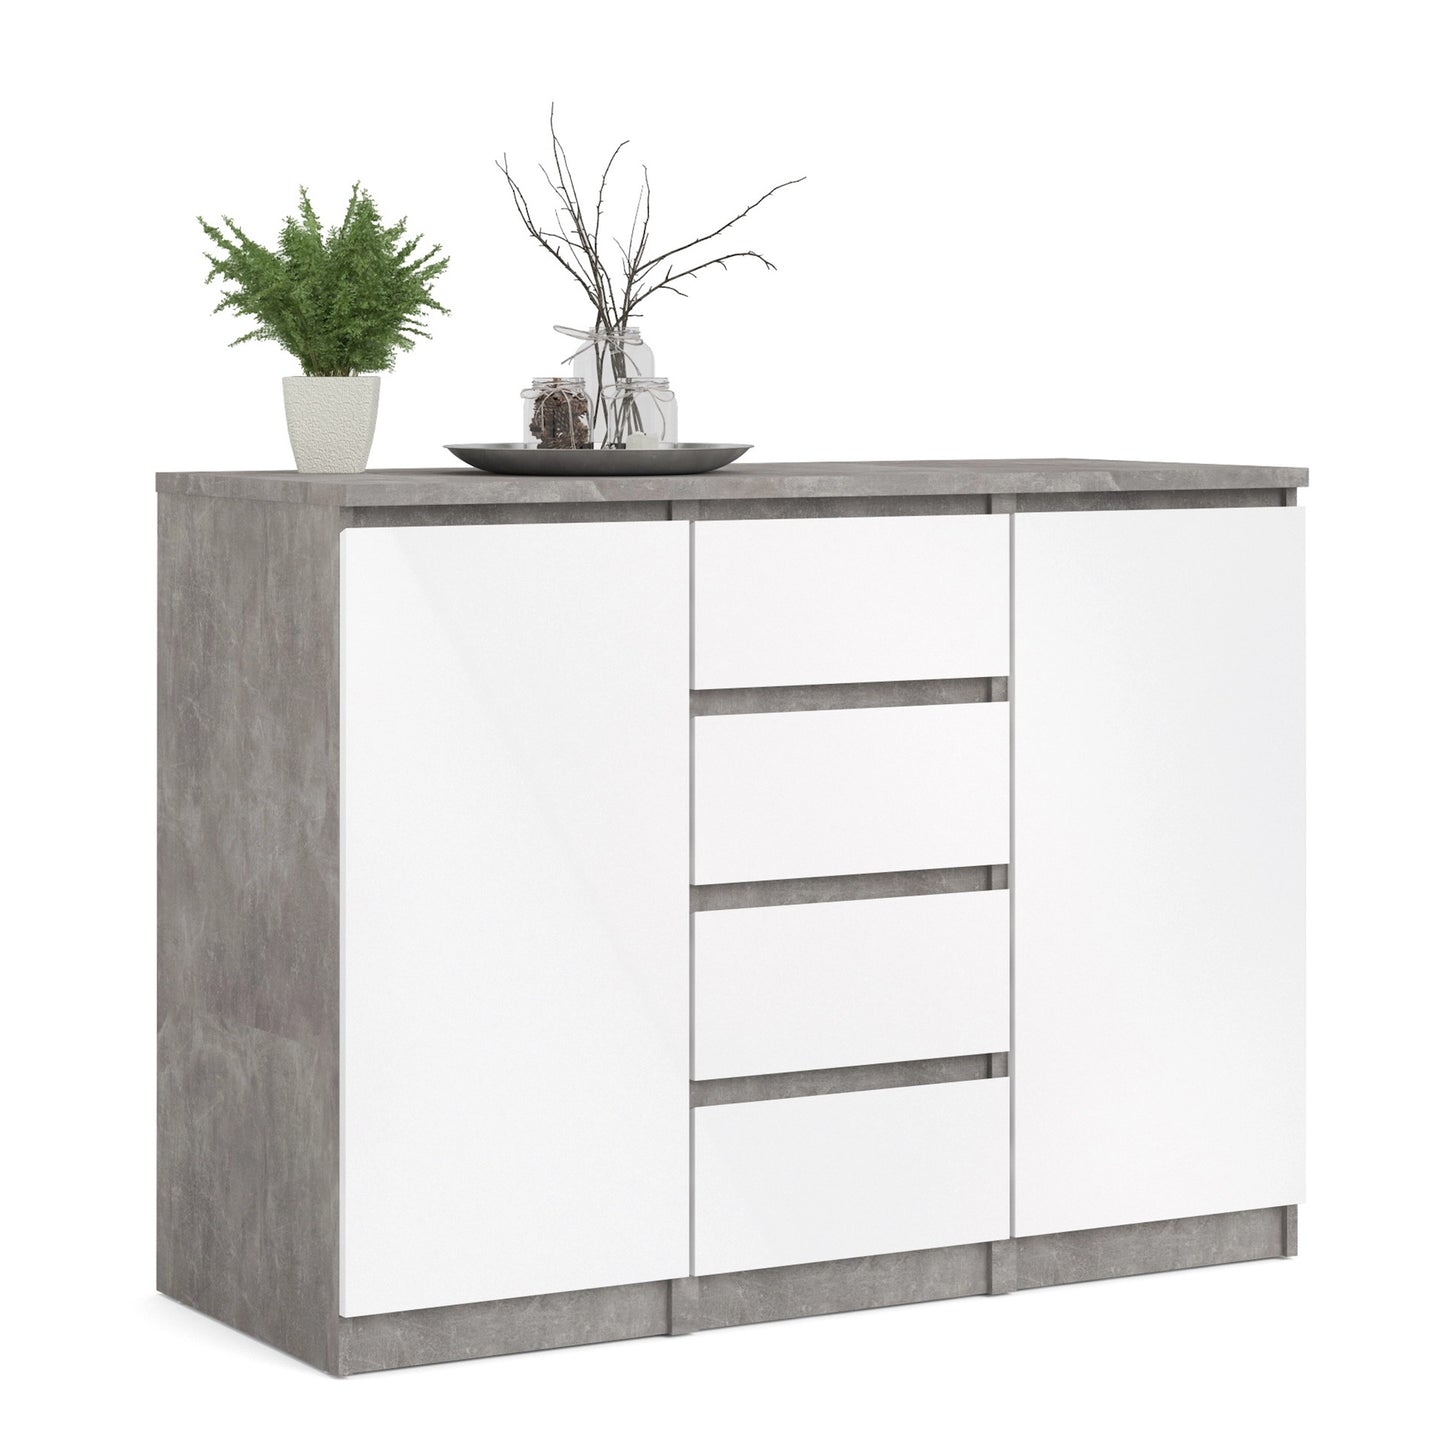 Furniture To Go Naia Sideboard 4 Drawers 2 Doors in Concrete & White High Gloss